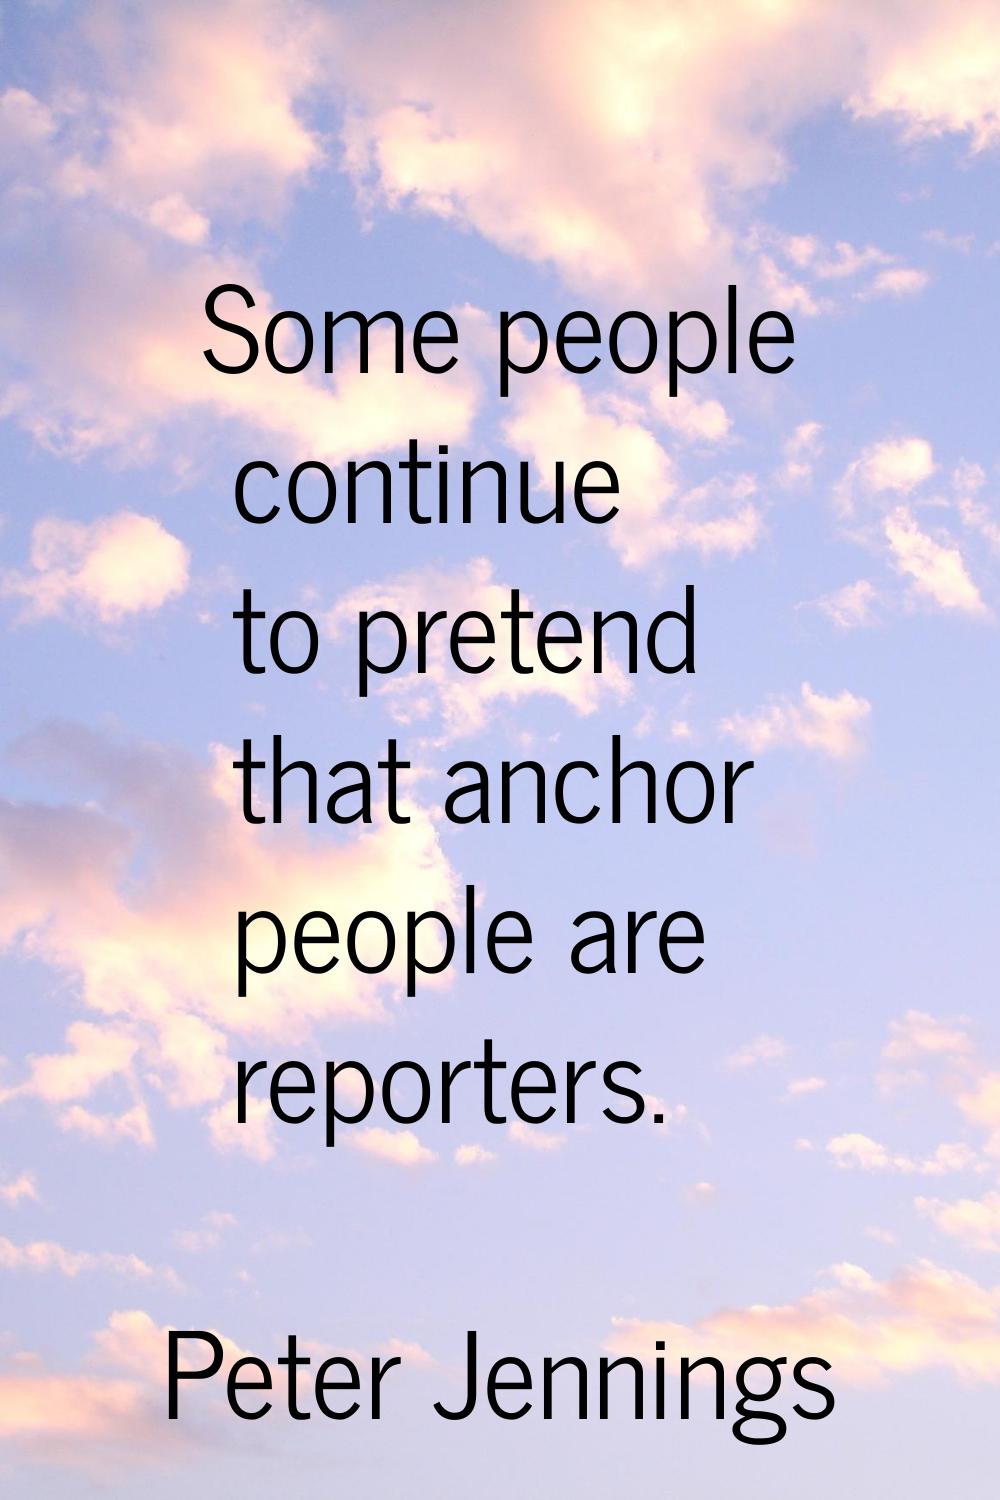 Some people continue to pretend that anchor people are reporters.